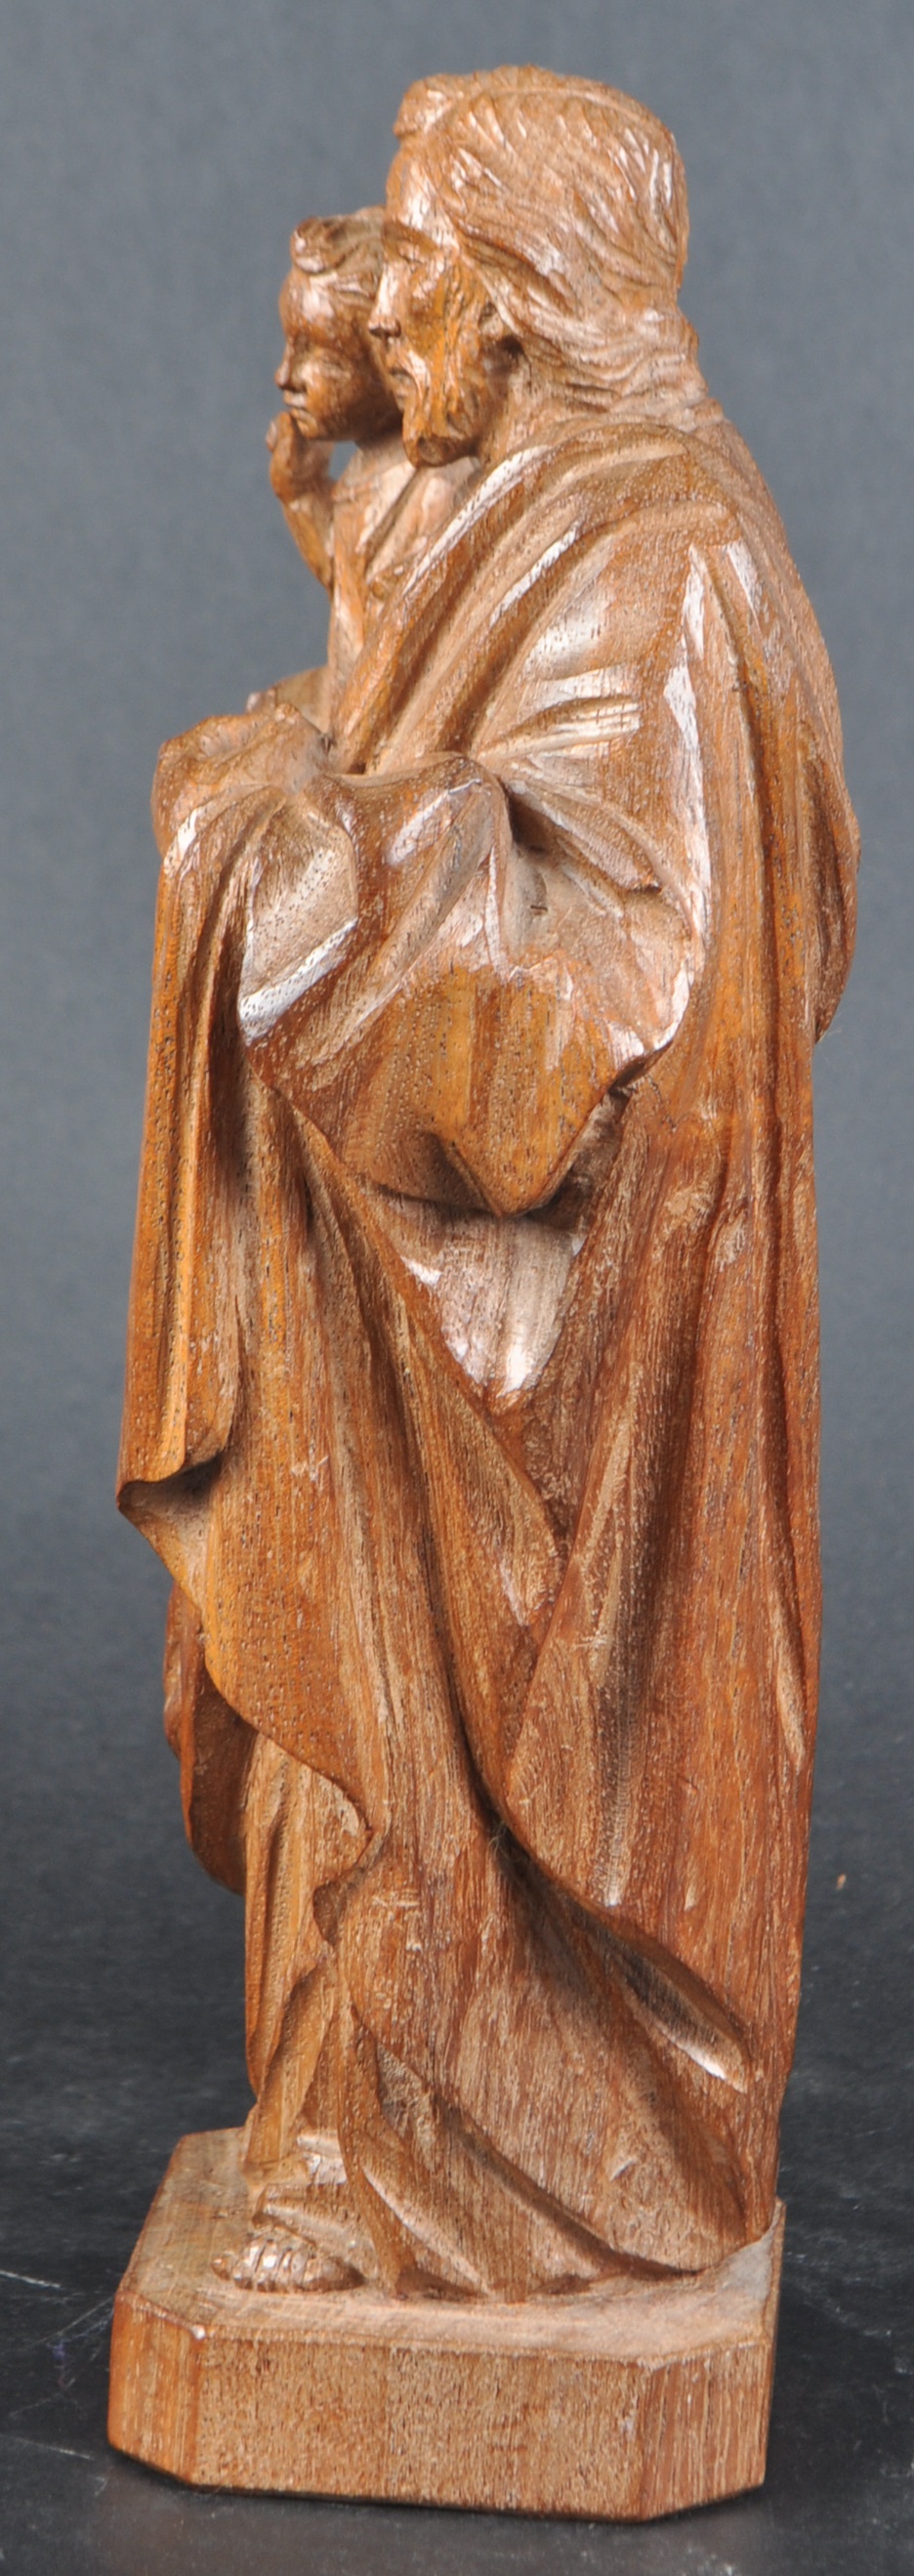 19TH CENTURY HAND CARVED FIGURE OF ST JOSEPH - Image 2 of 5